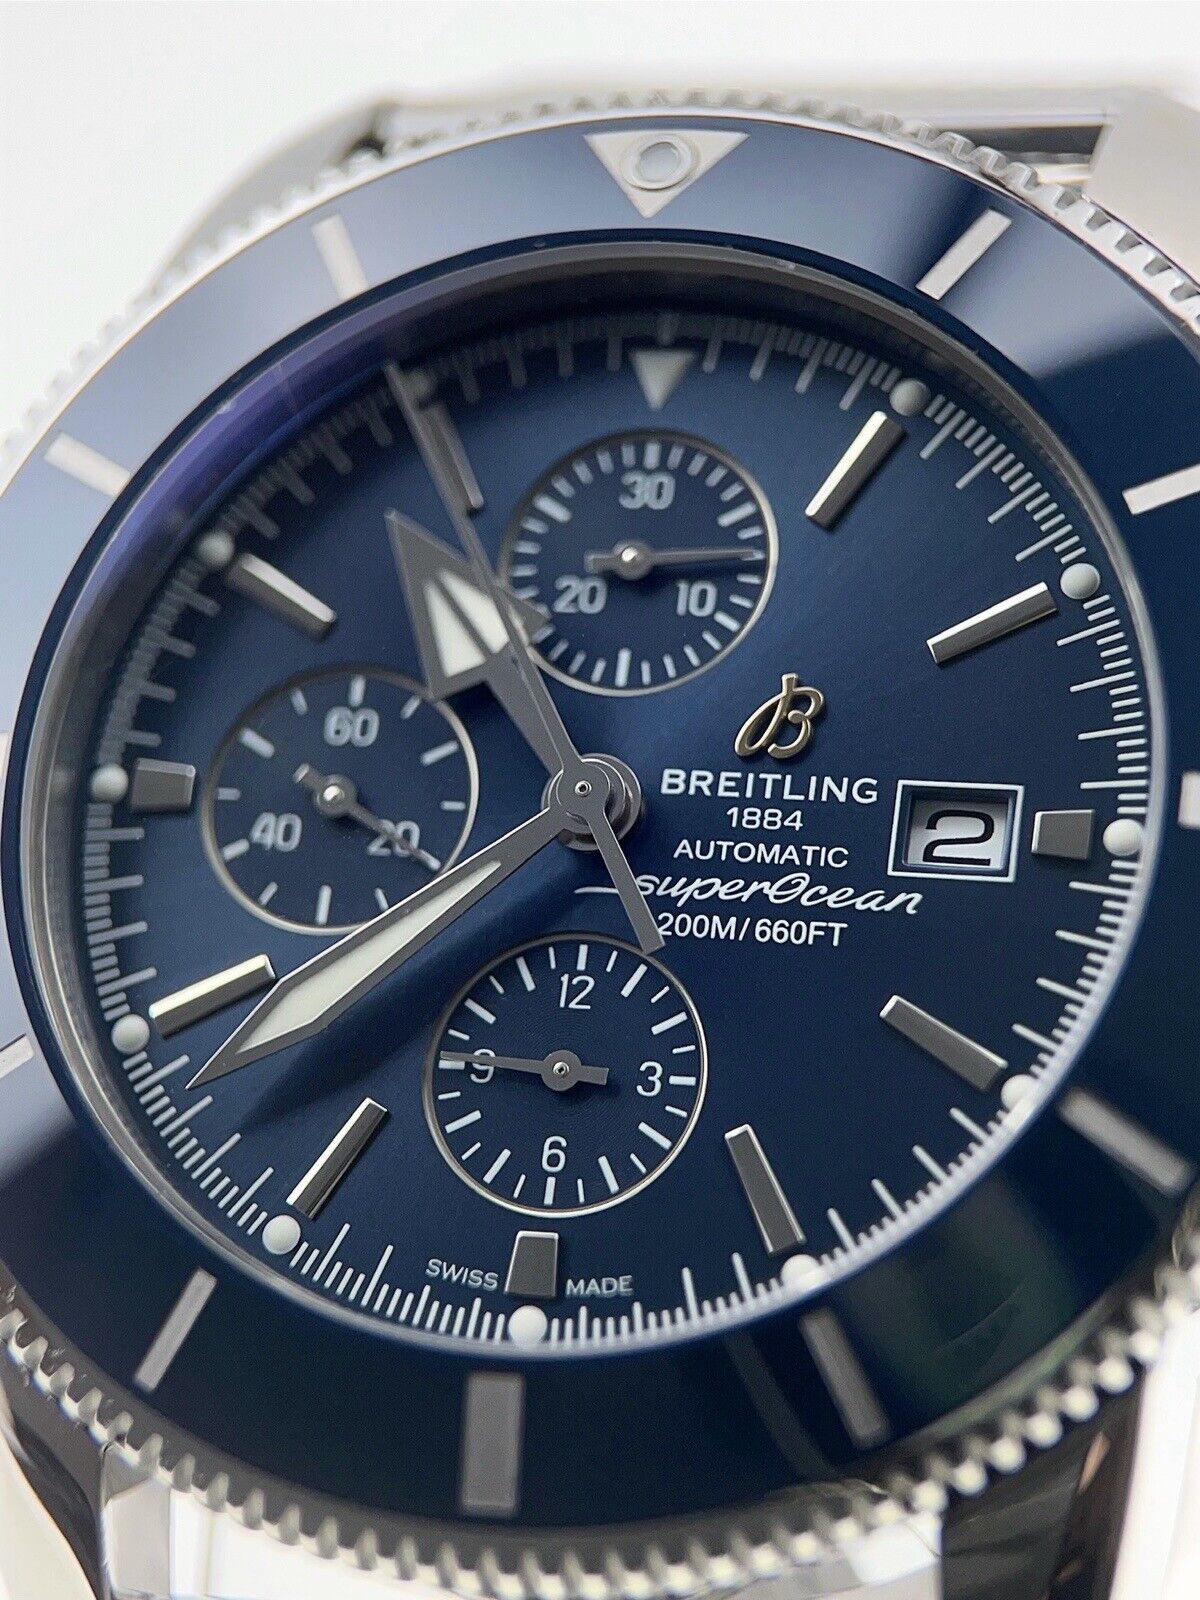 Breitling Superocean Heritage Chronograph Steel Blue 46mm Automatic Men’s Watch